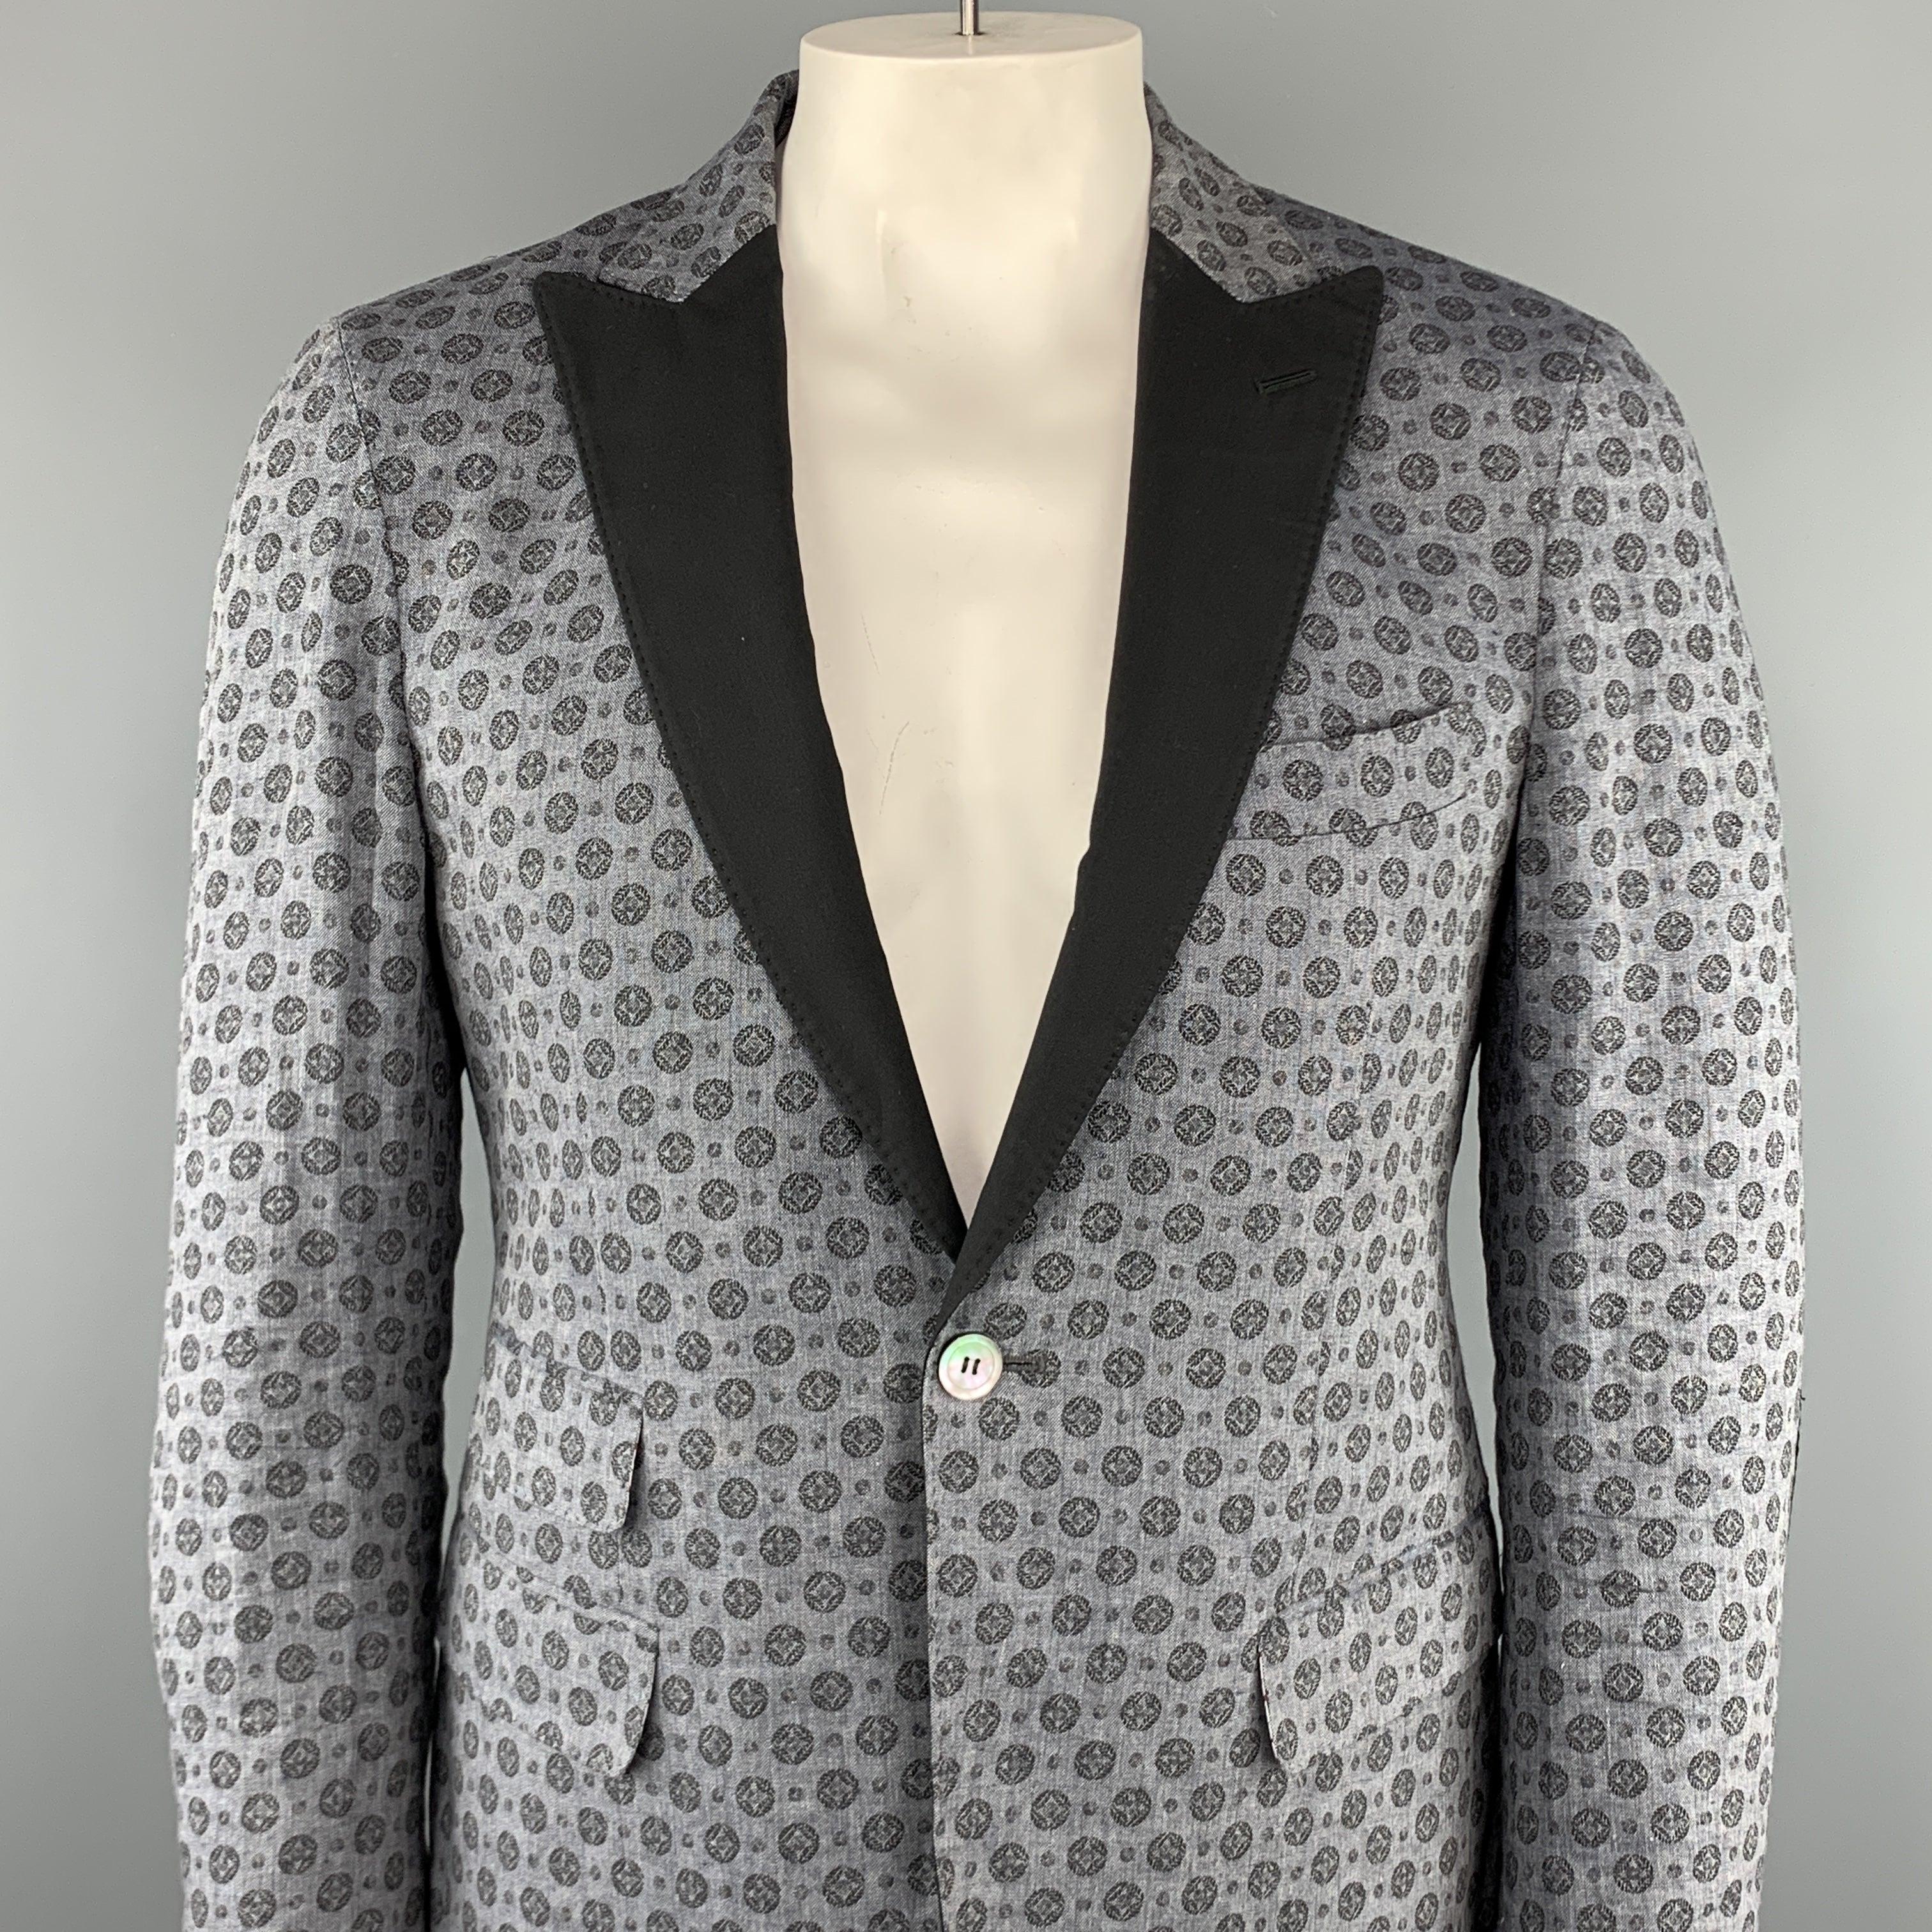 MICHAEL BASTIAN Sport Coat comes in a gray print linen featuring a peak lapel style, elbow patches, and a single button closure. Made in Italy.
Excellent
Pre-Owned Condition. 

Marked:   50 

Measurements: 
 
Shoulder: 18 inches 
Chest: 40 inches